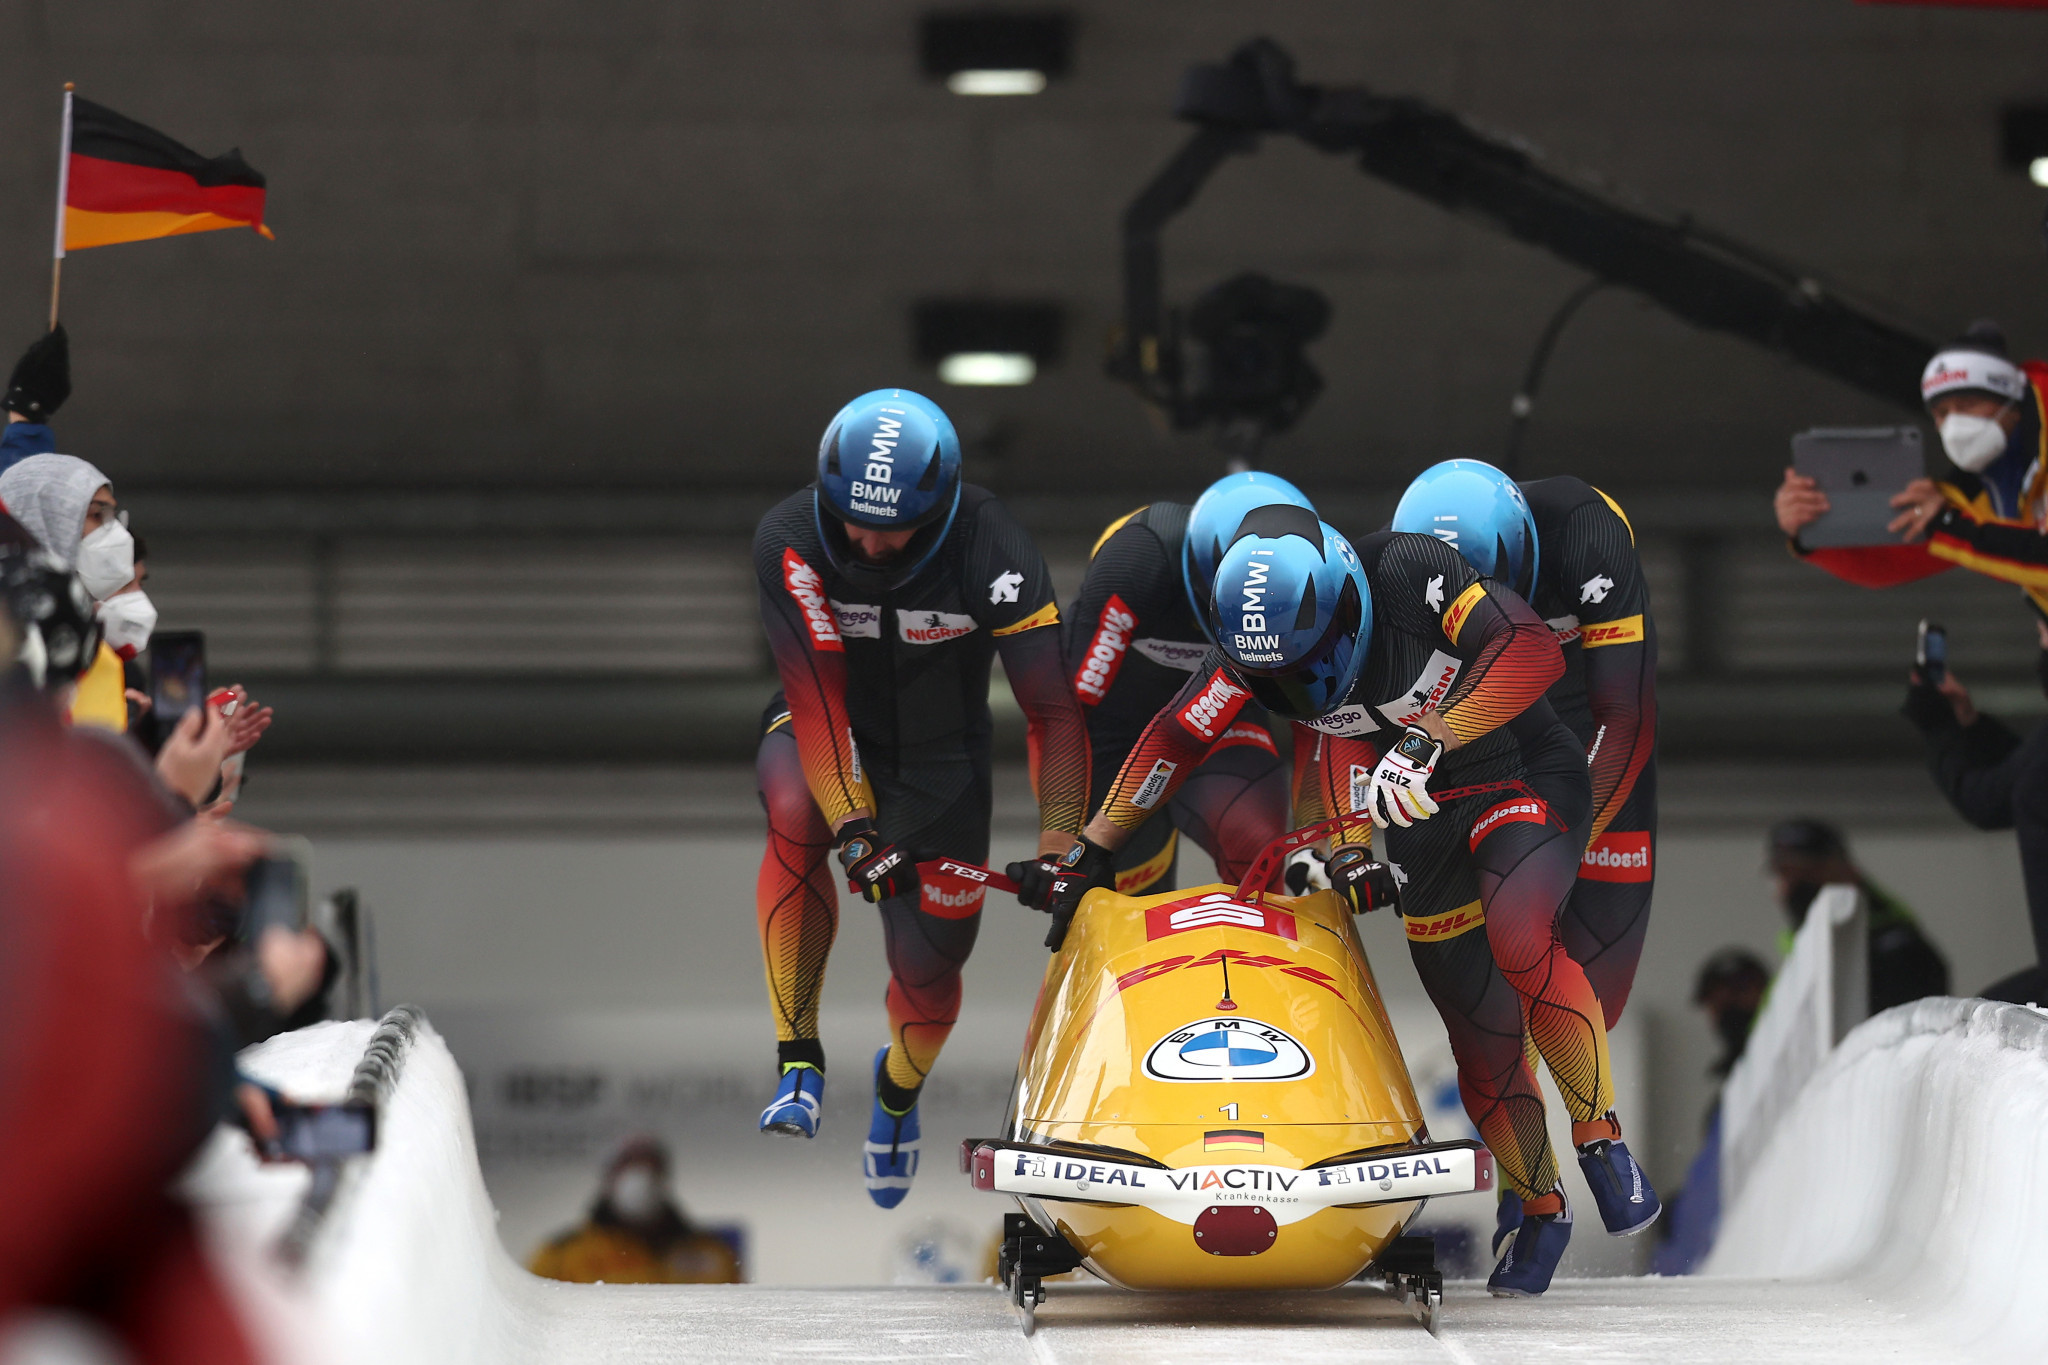 Germany won gold in the four-man and two-woman events at the IBSF Bobsleigh World Cup ©Getty Images